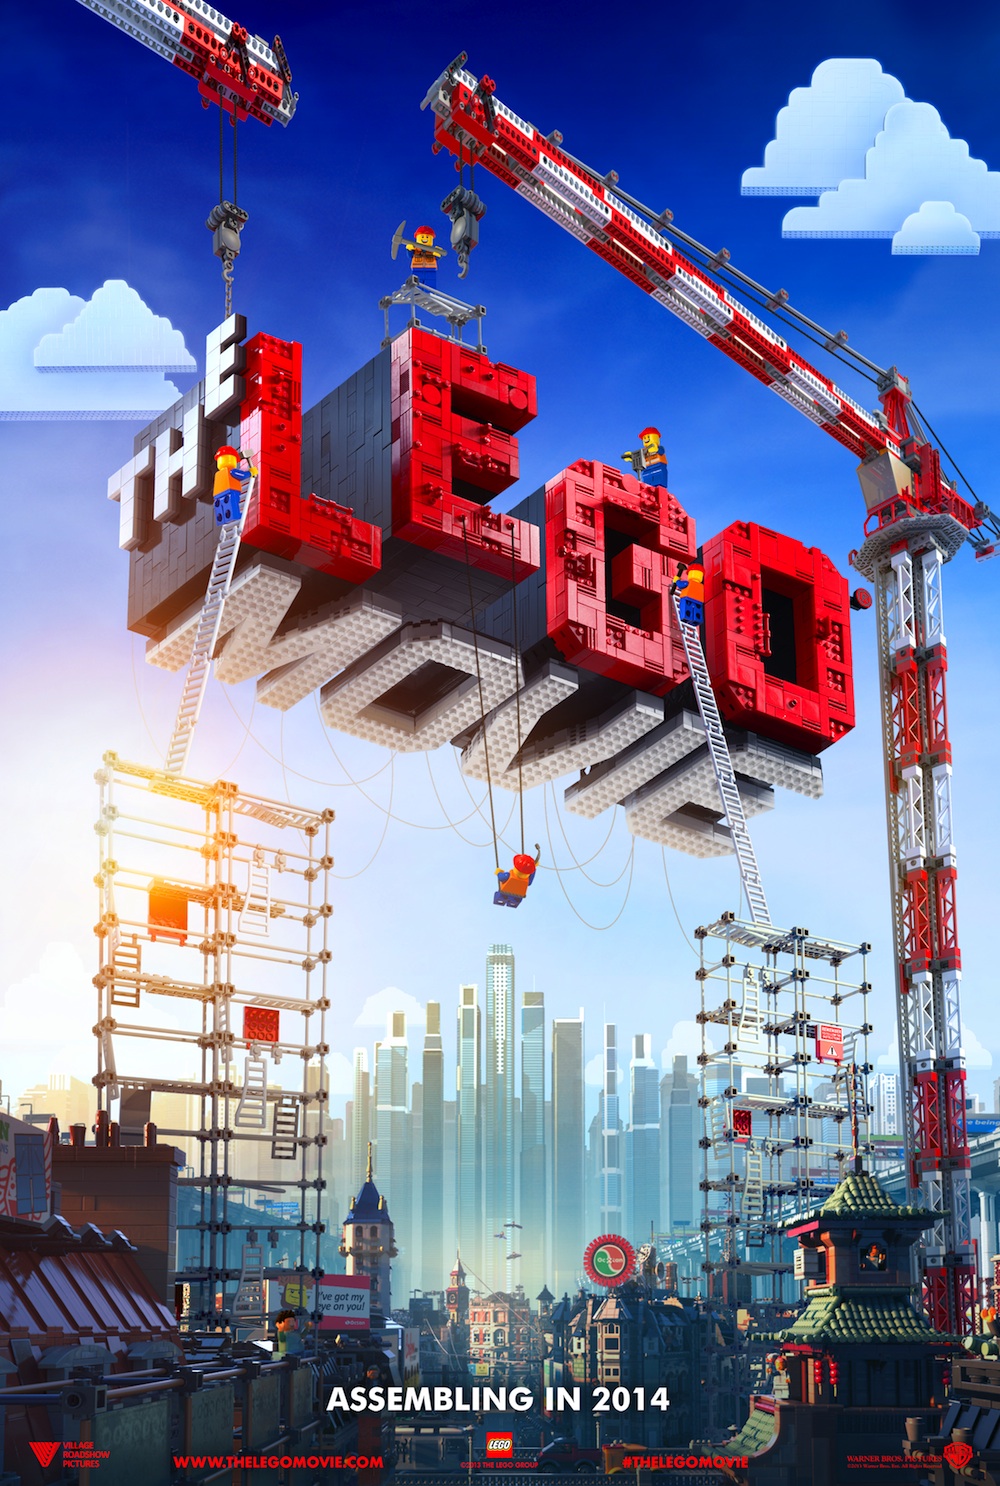 Geek insider, geekinsider, geekinsider. Com,, lego assembles on the big screen, entertainment